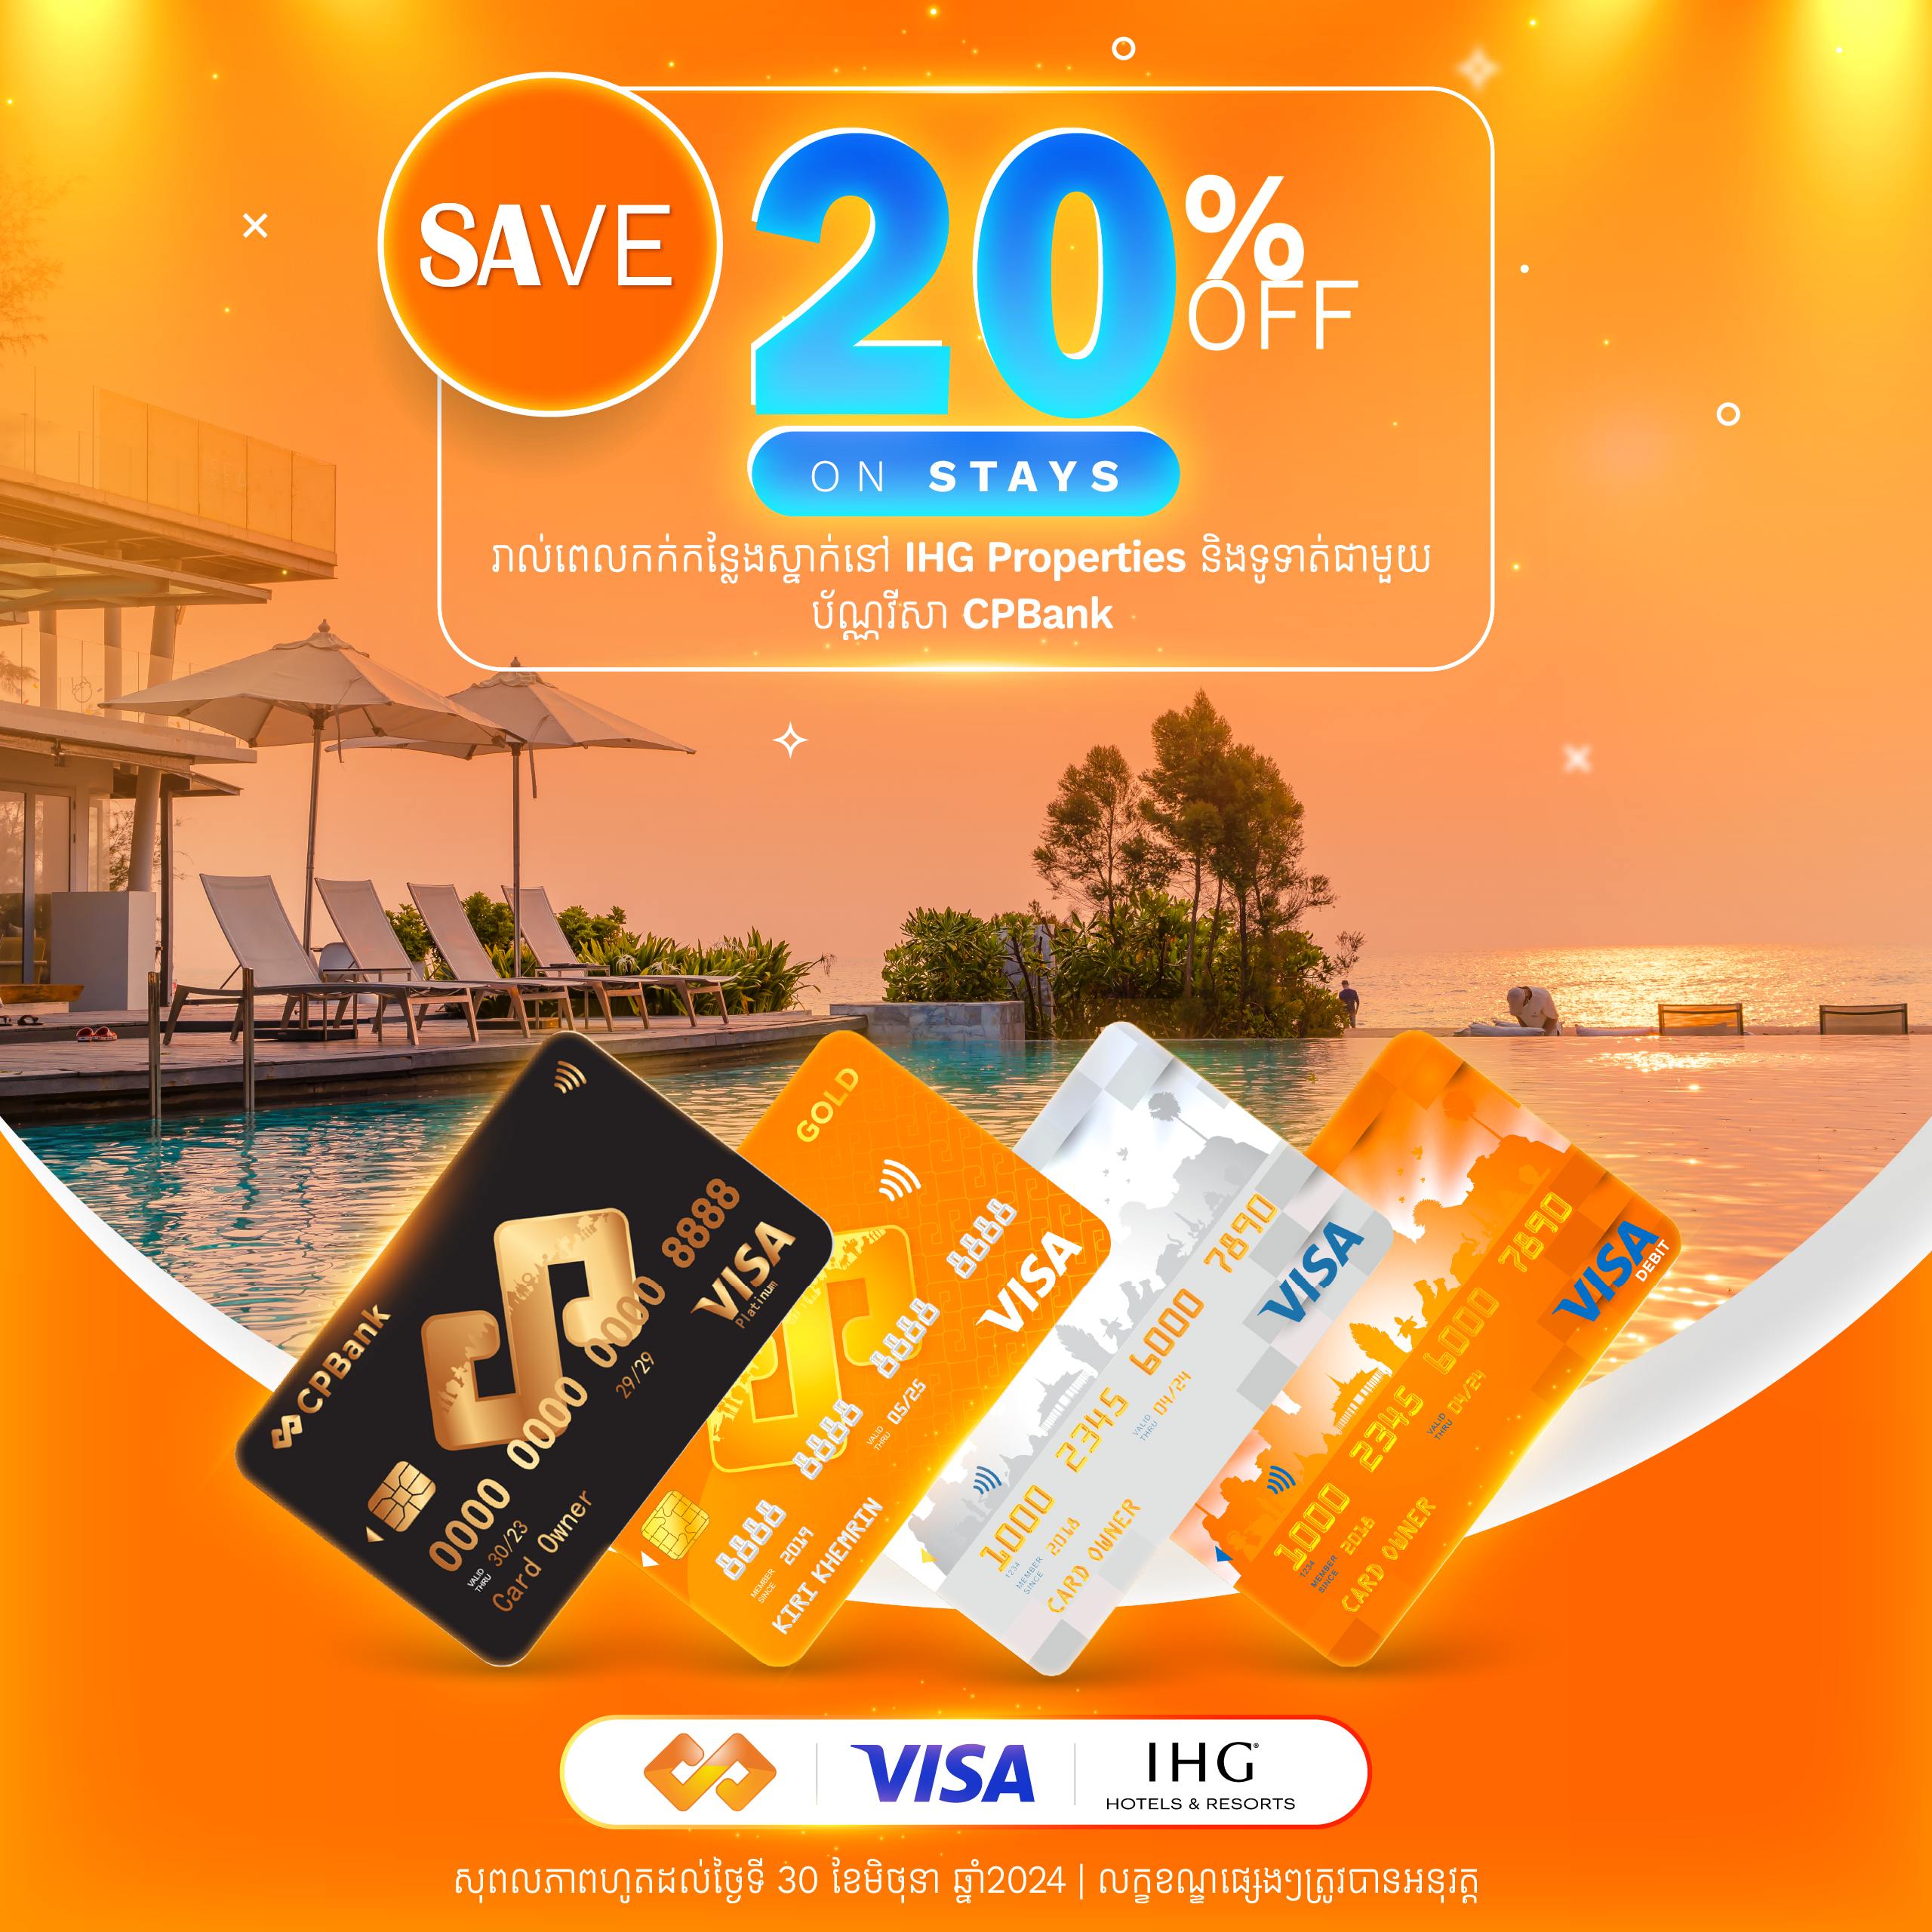 Get 20% off on stays at IHG Properties with CPBank VISA cards